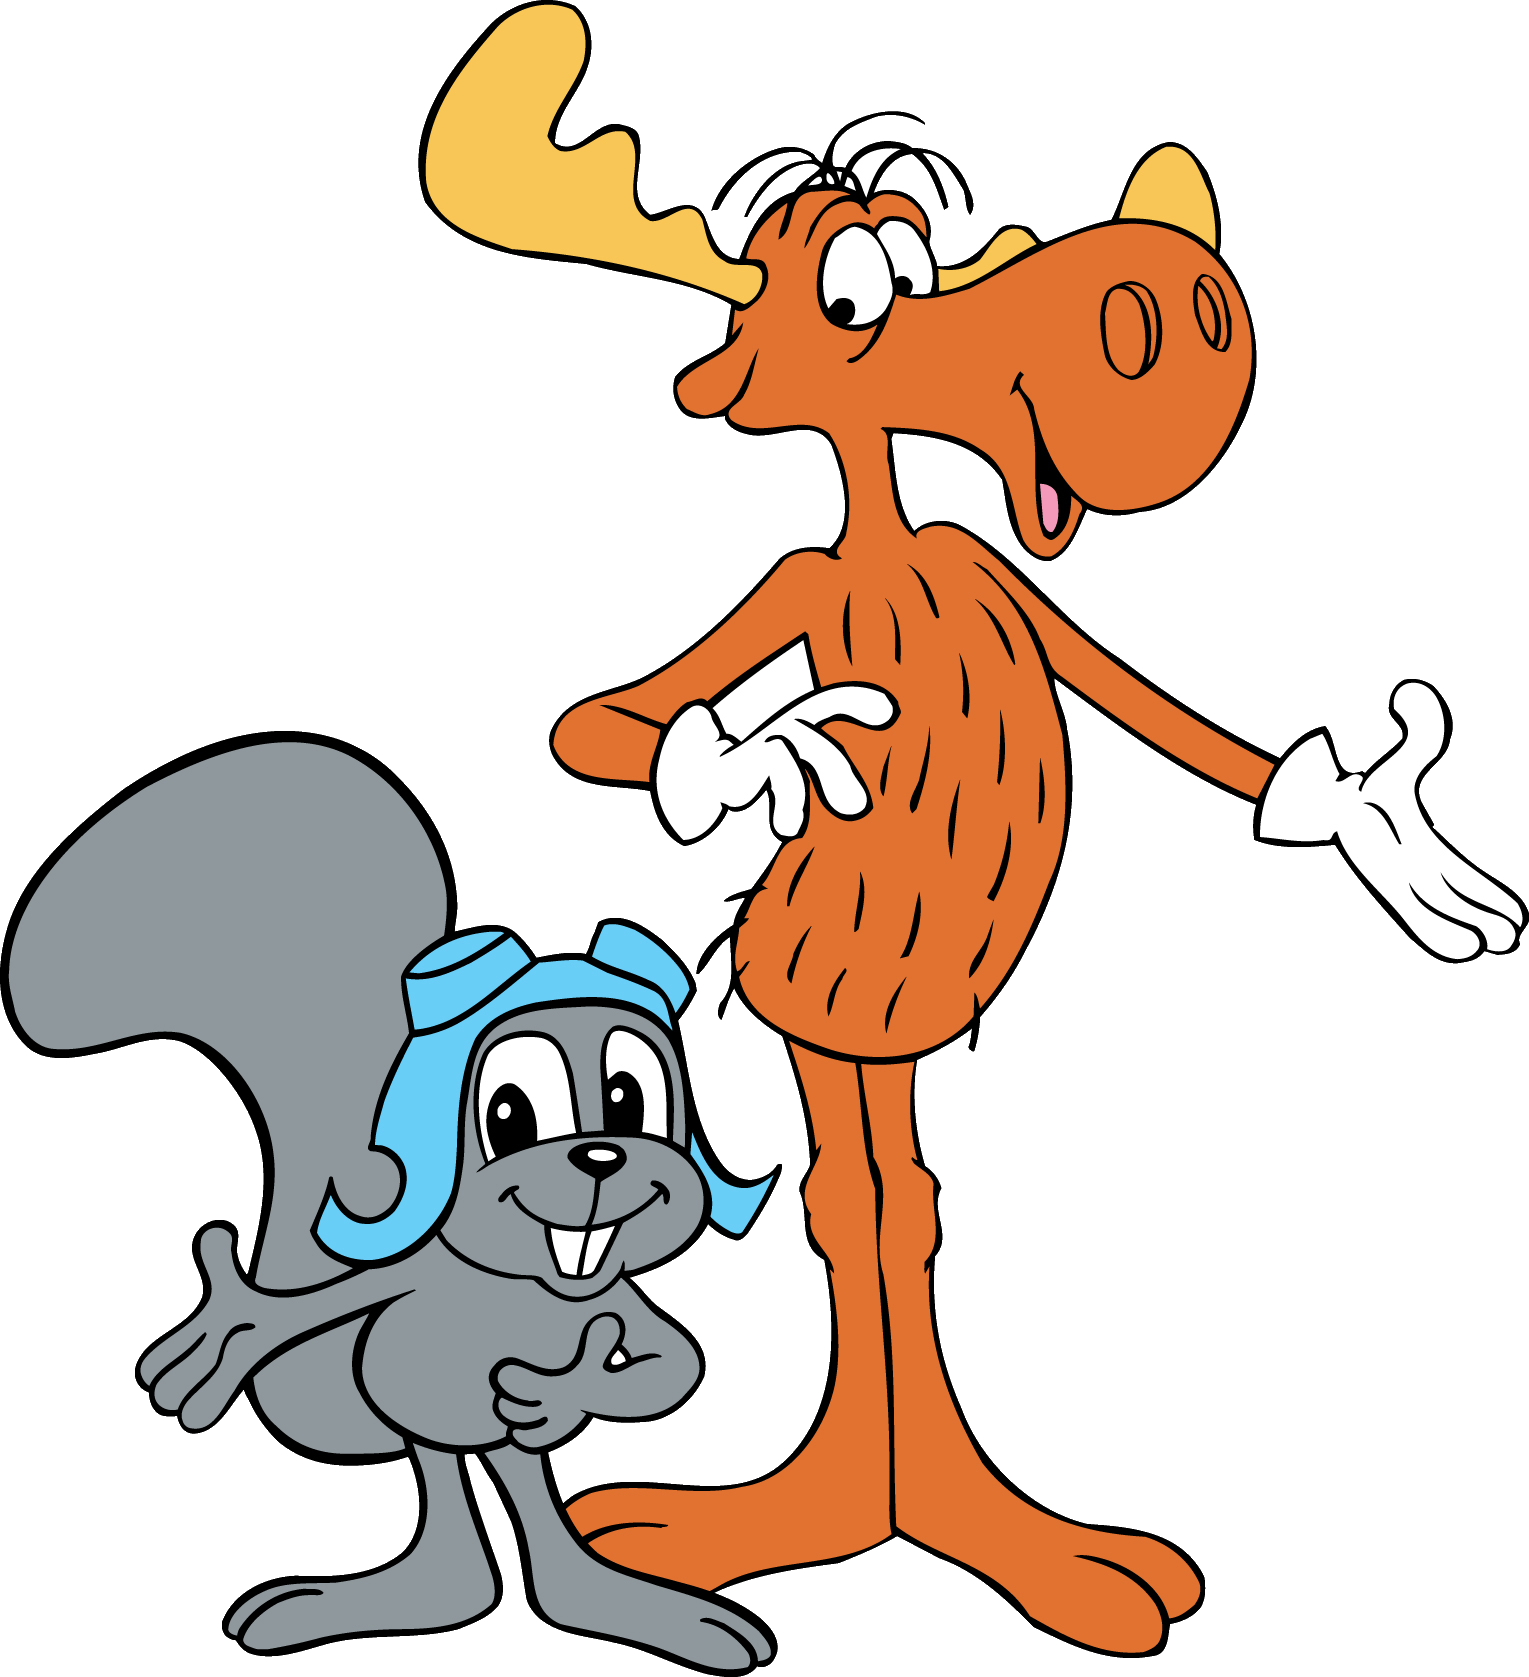 Download and share clipart about Remix - Rocky Bullwinkle, Find more high q...